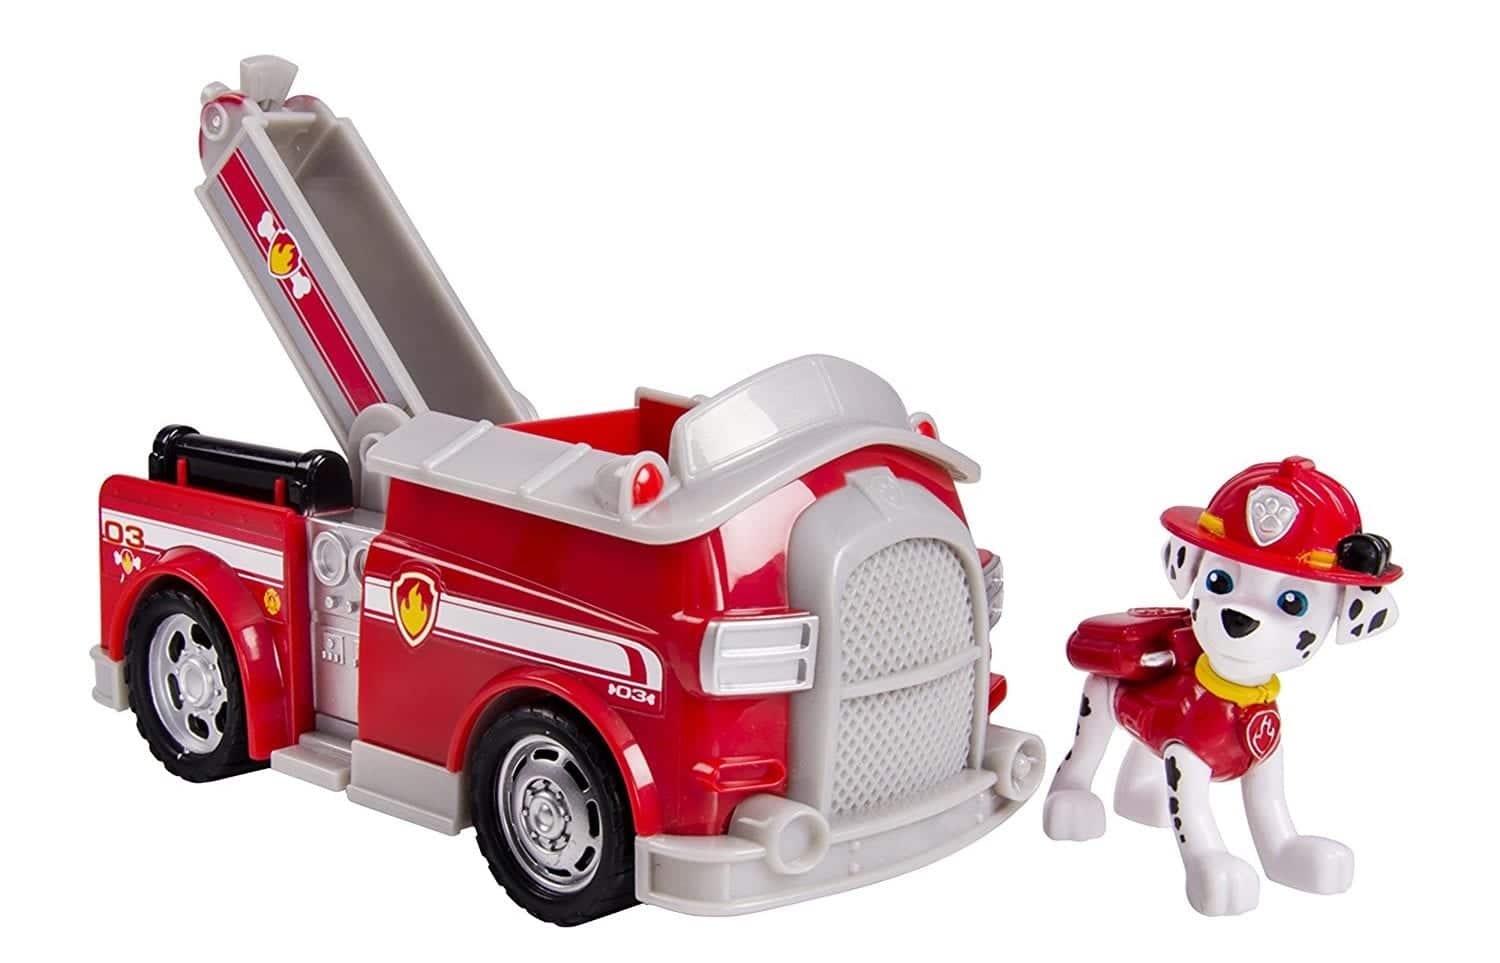 Paw Patrol Toys 2017: Marshall's Fire Truck 2018